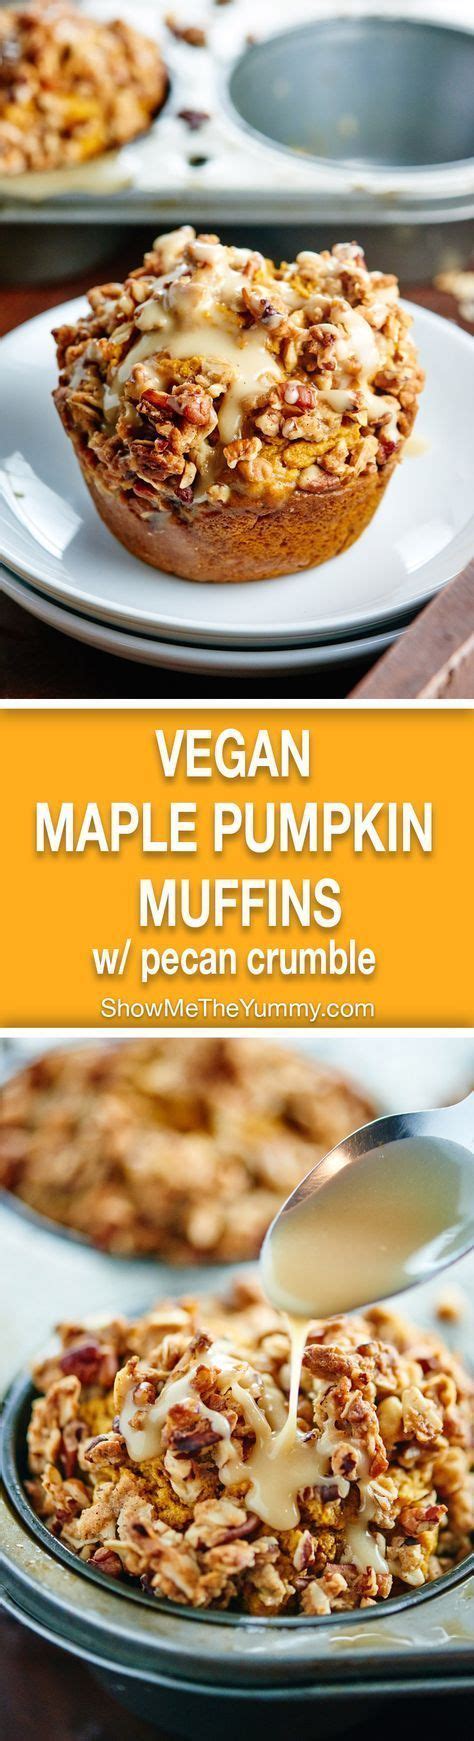 These Healthy Vegan Pumpkin Muffins Are Made W Whole Wheat Flour And Are